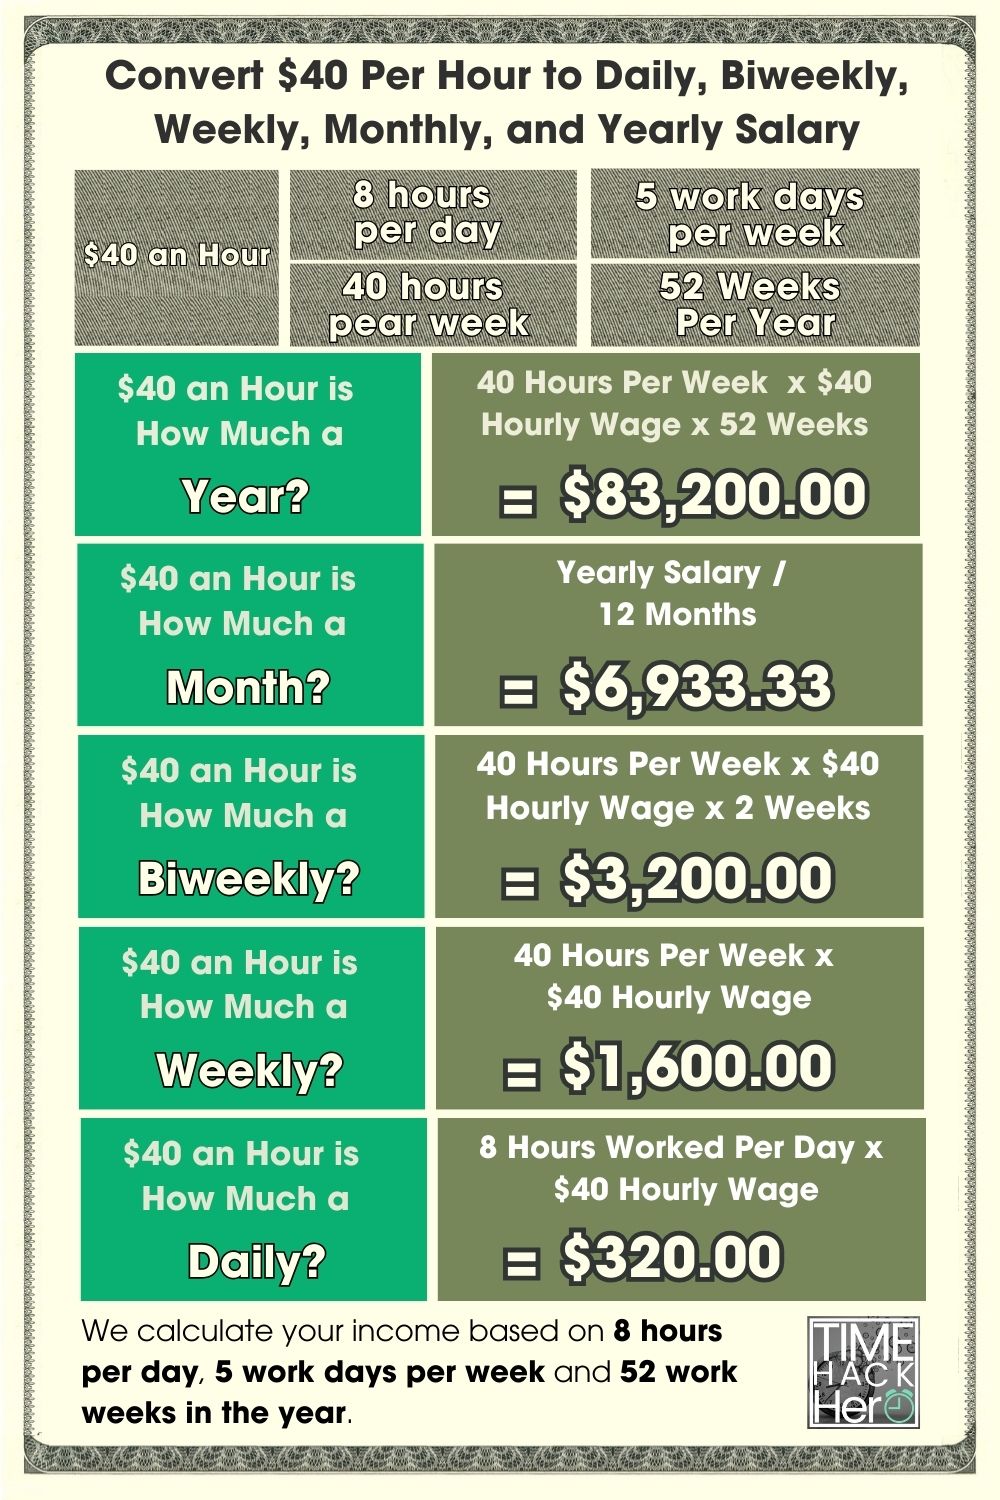 Convert $40 Per Hour to Daily, Biweekly, Weekly, Monthly, and Yearly Salary